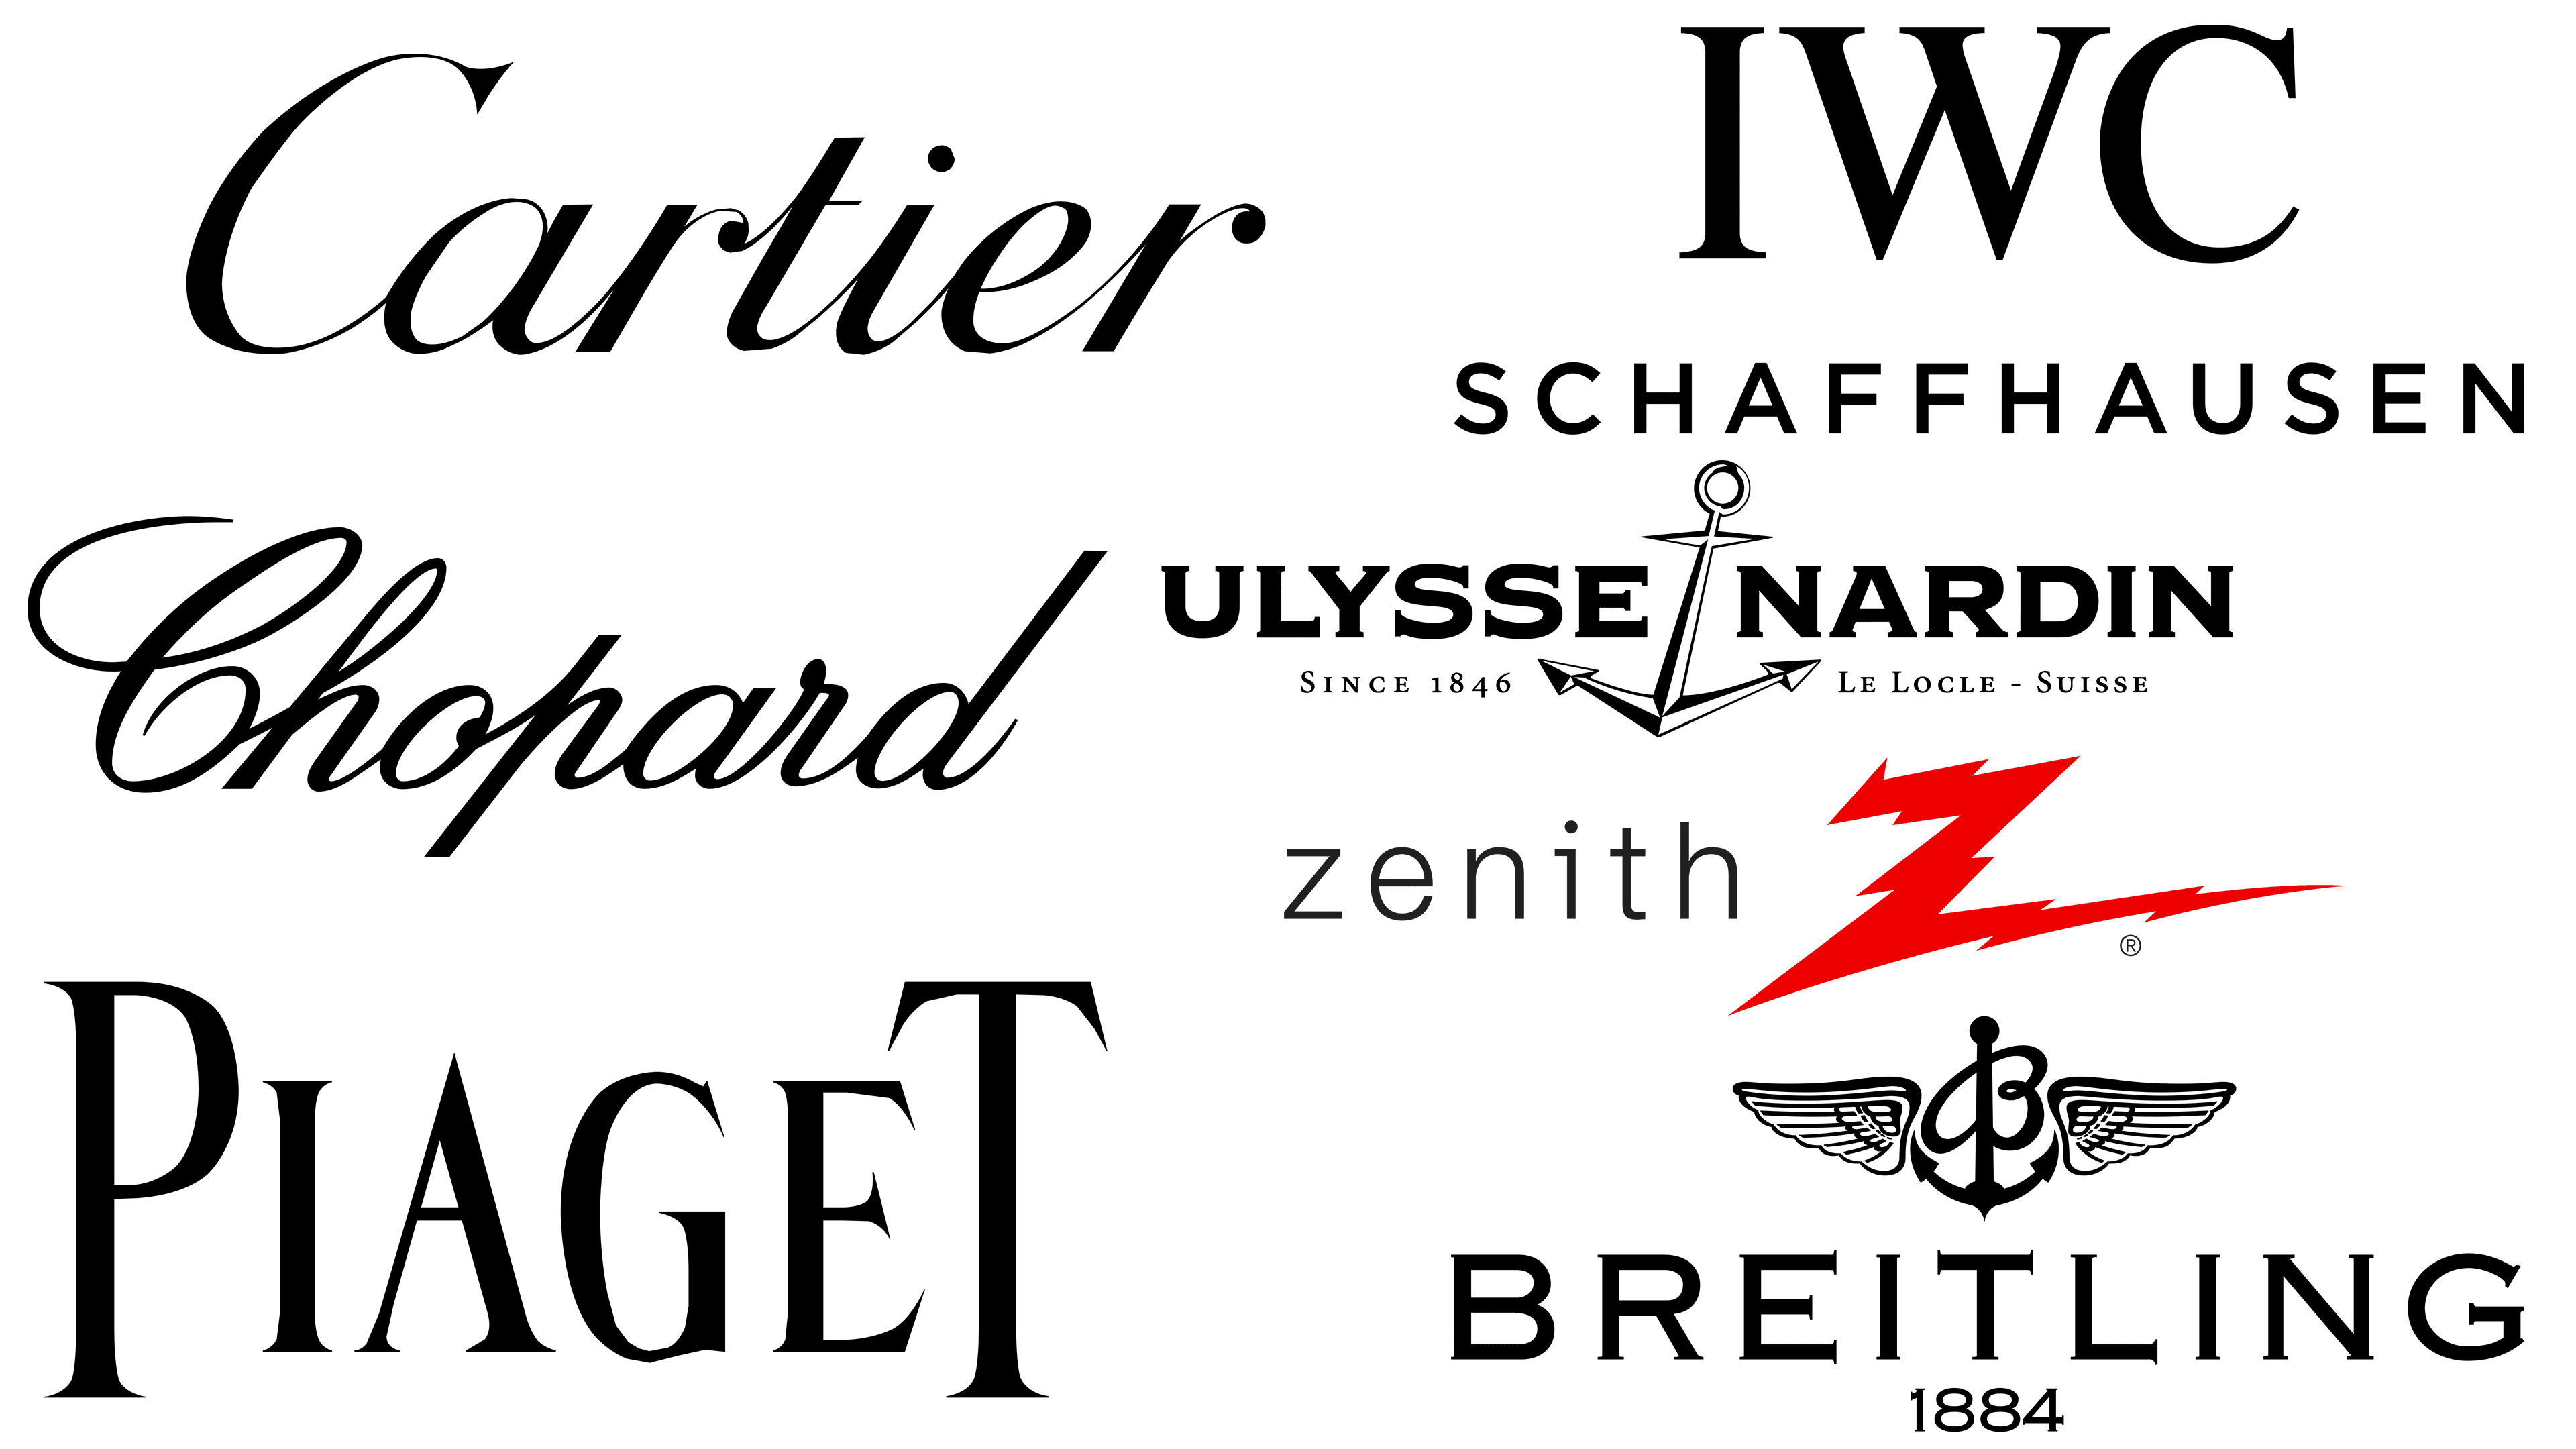 World's Famous Luxury Watch Brand Logos #luxurywatches #watches